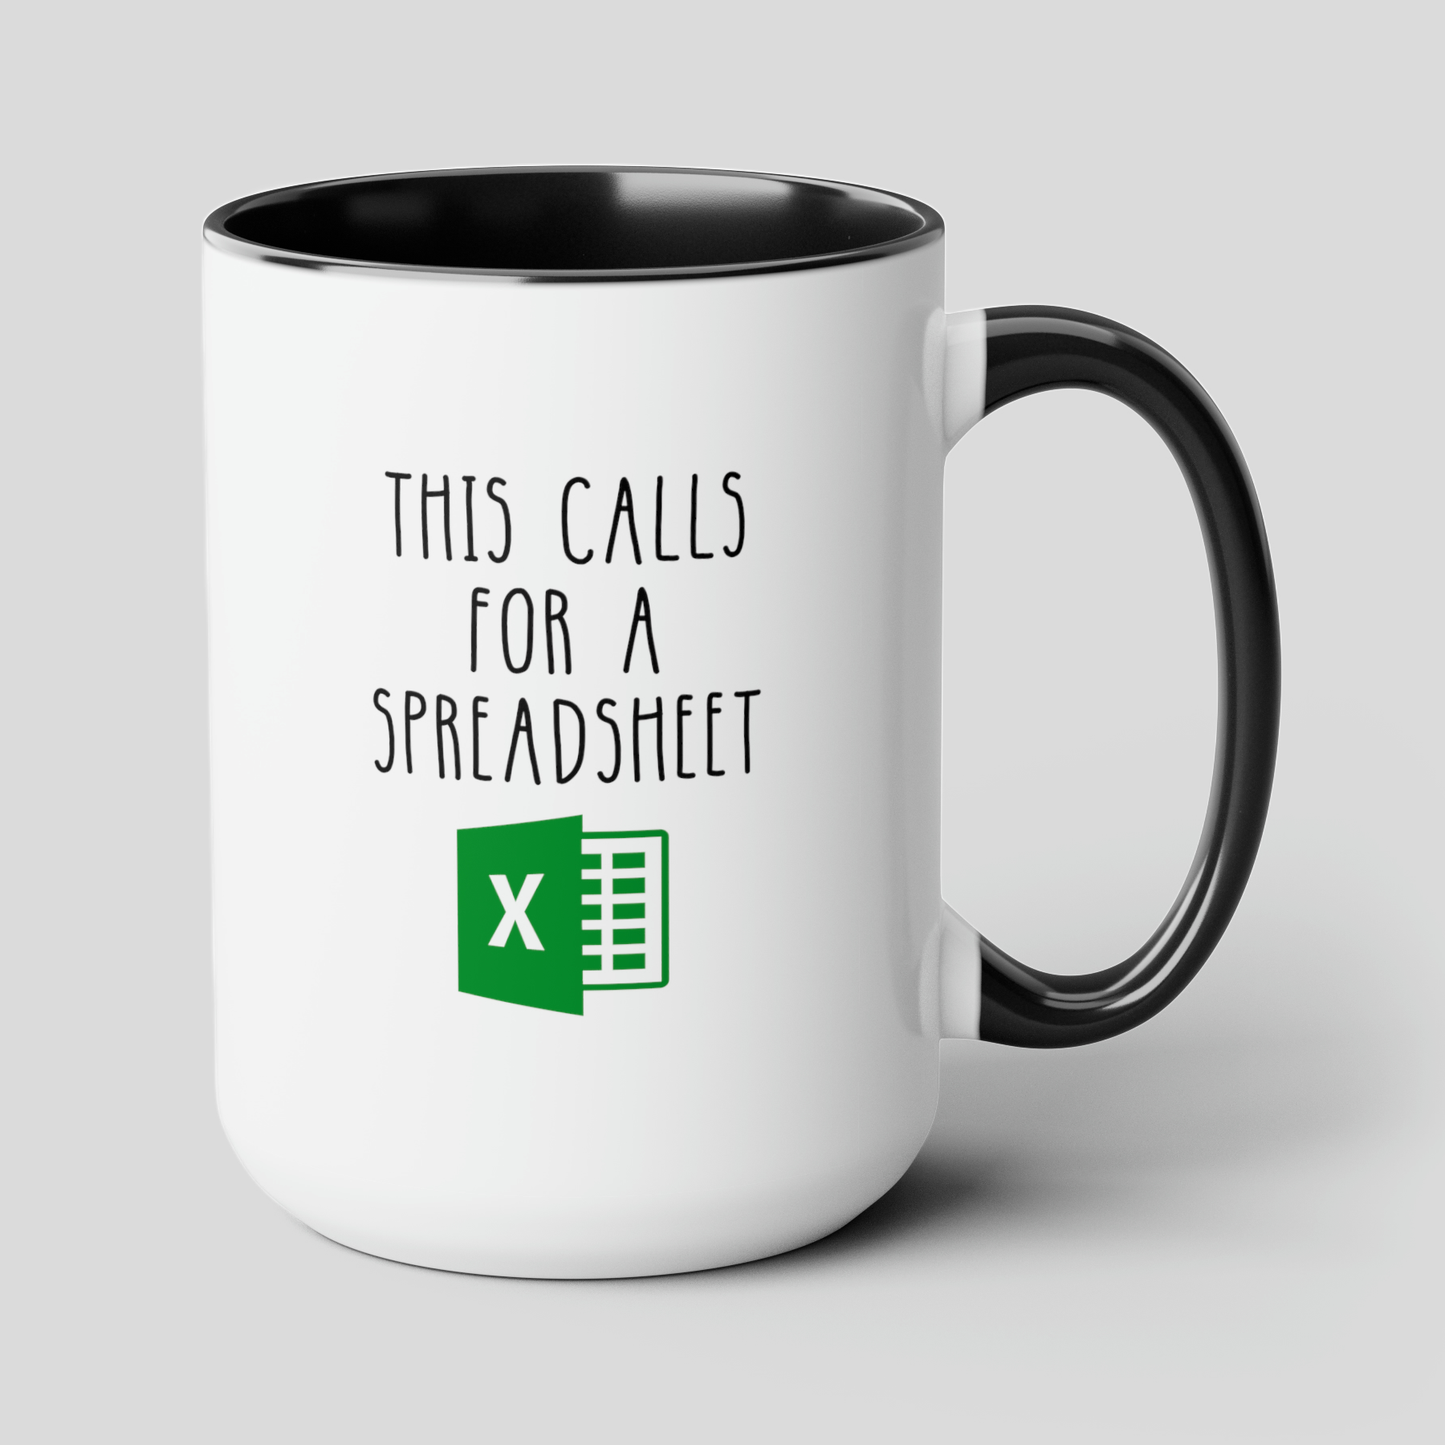 This Calls For A Spreadsheet 15oz white with black accent funny large coffee mug gift for coworker office decor excel accountant accounting waveywares wavey wares wavywares wavy wares cover